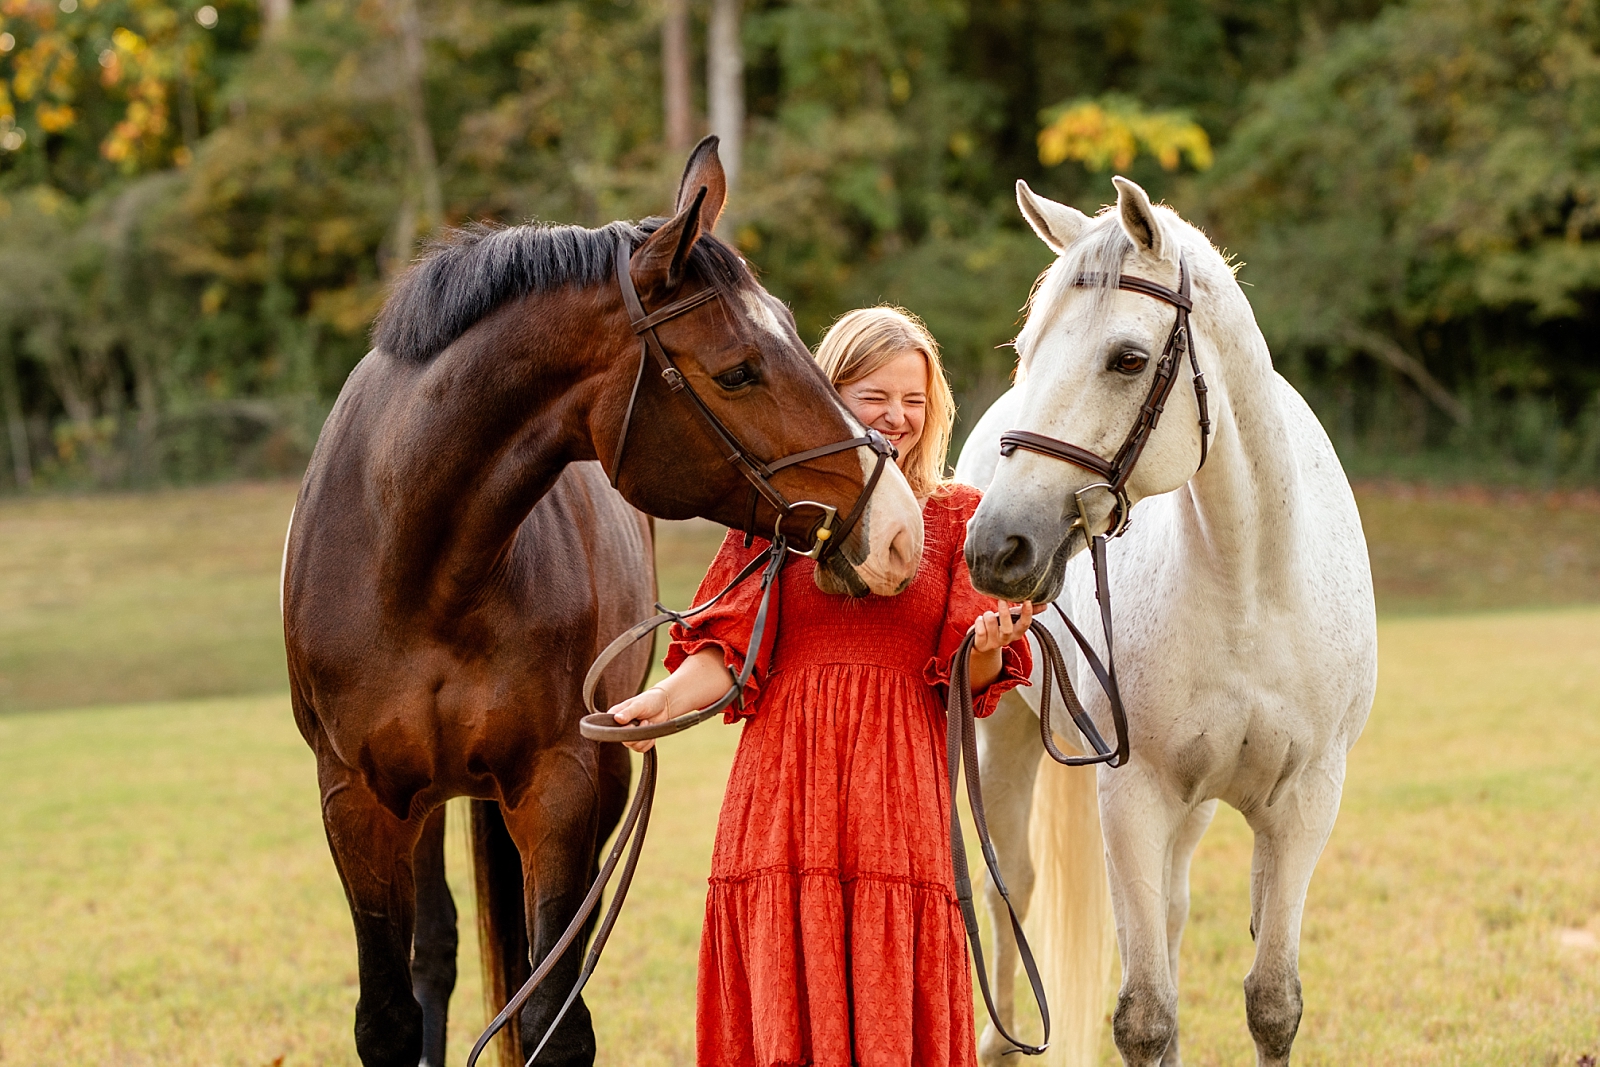 North Alabama horse photographer. Photos of horses in the fall. Equestrian. High school senior with her horse.